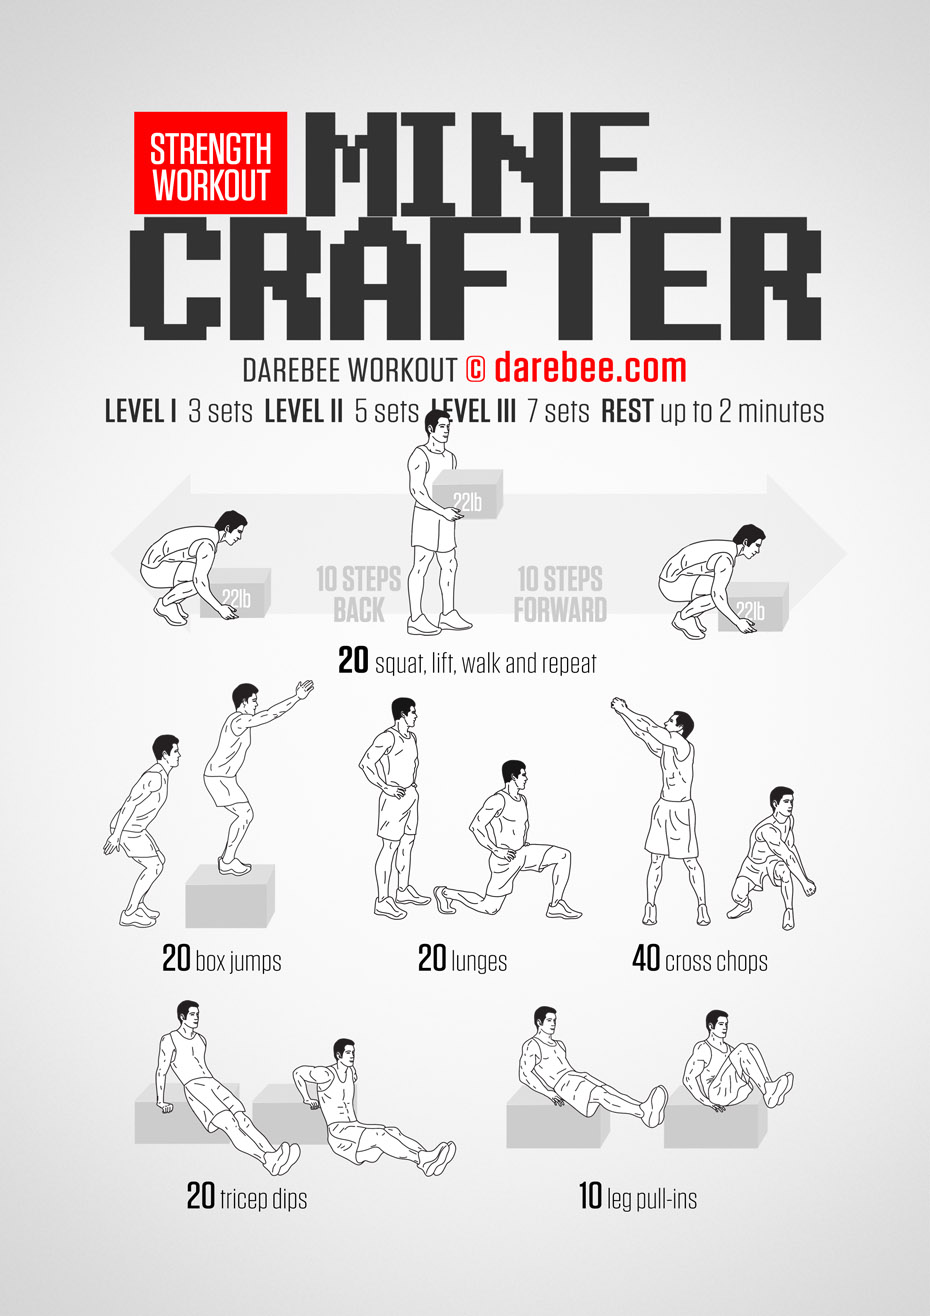 Minecrafter is a DAREBEE home fitness workout that will help you use what you have lying around to become fitter and stronger.